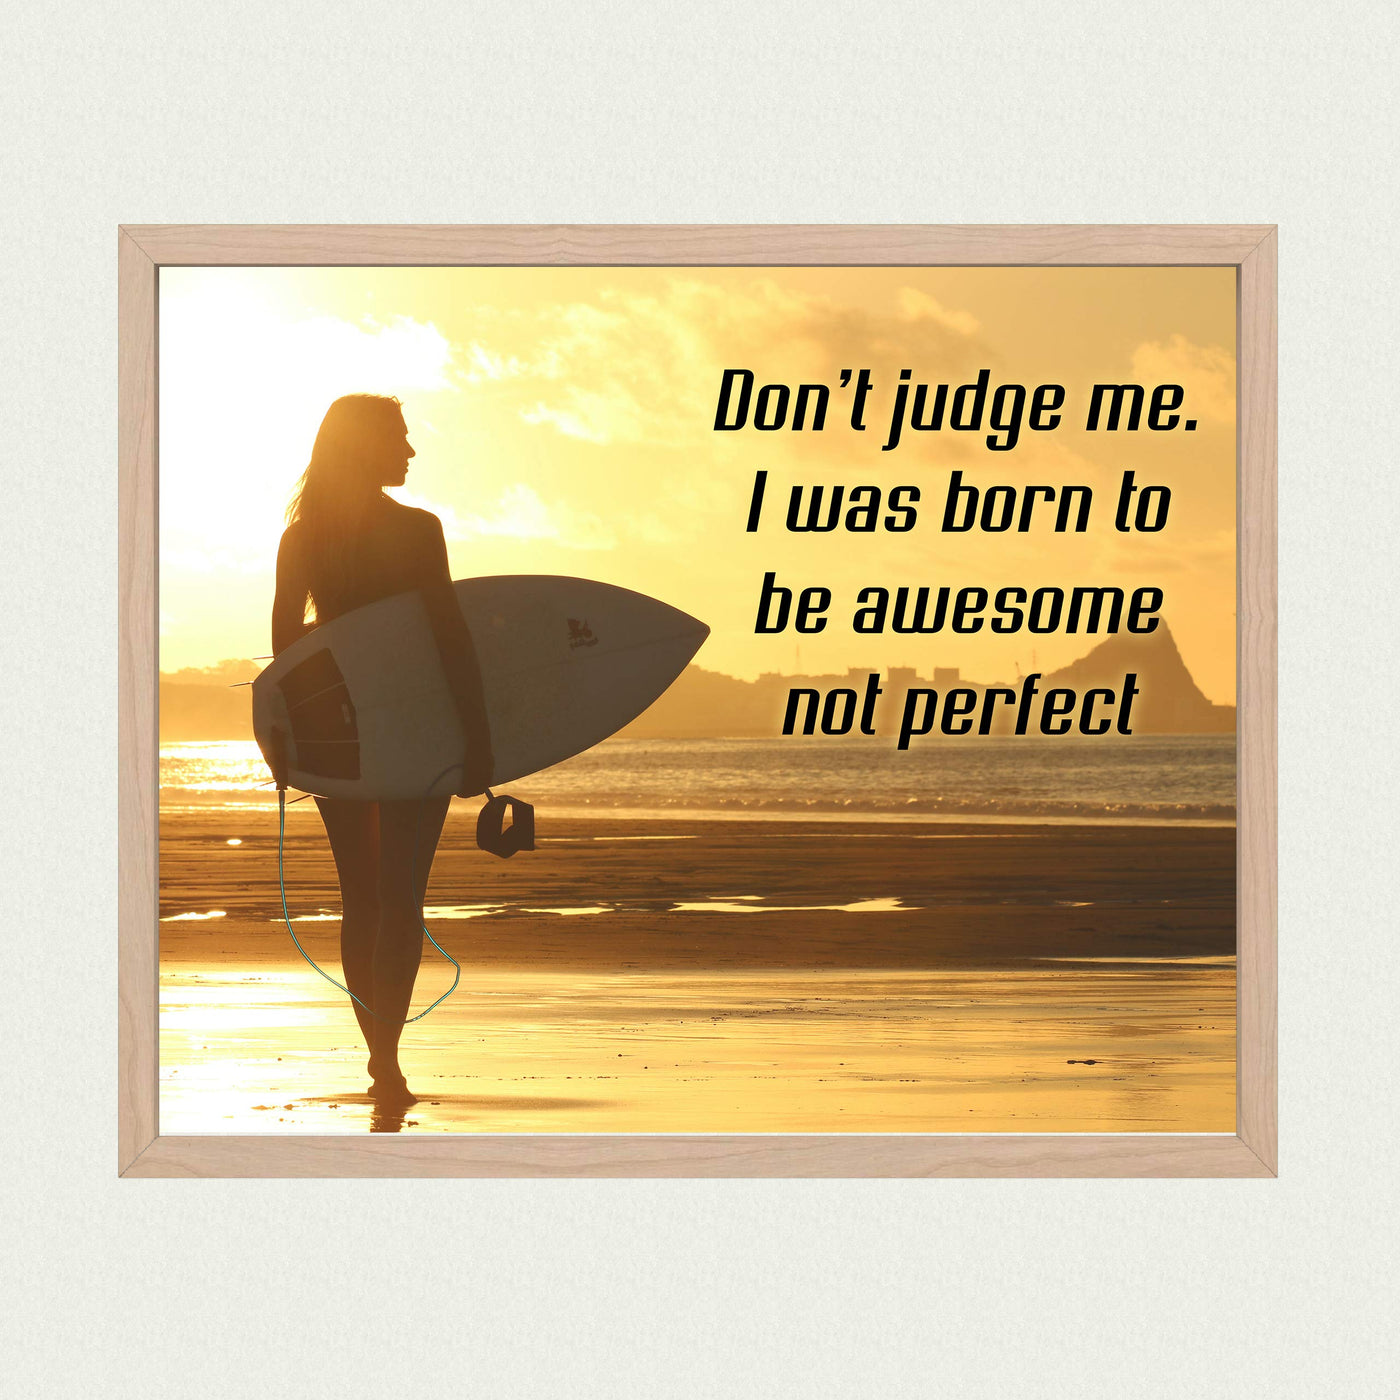 ?Don't Judge-I Was Born to be Awesome Not Perfect? Inspirational Quotes Wall Art -10 x 8" Beach Sunset Poster Print w/Surfer Girl Image-Ready to Frame. Home-Office-School-Dorm Decor. Great Reminder!